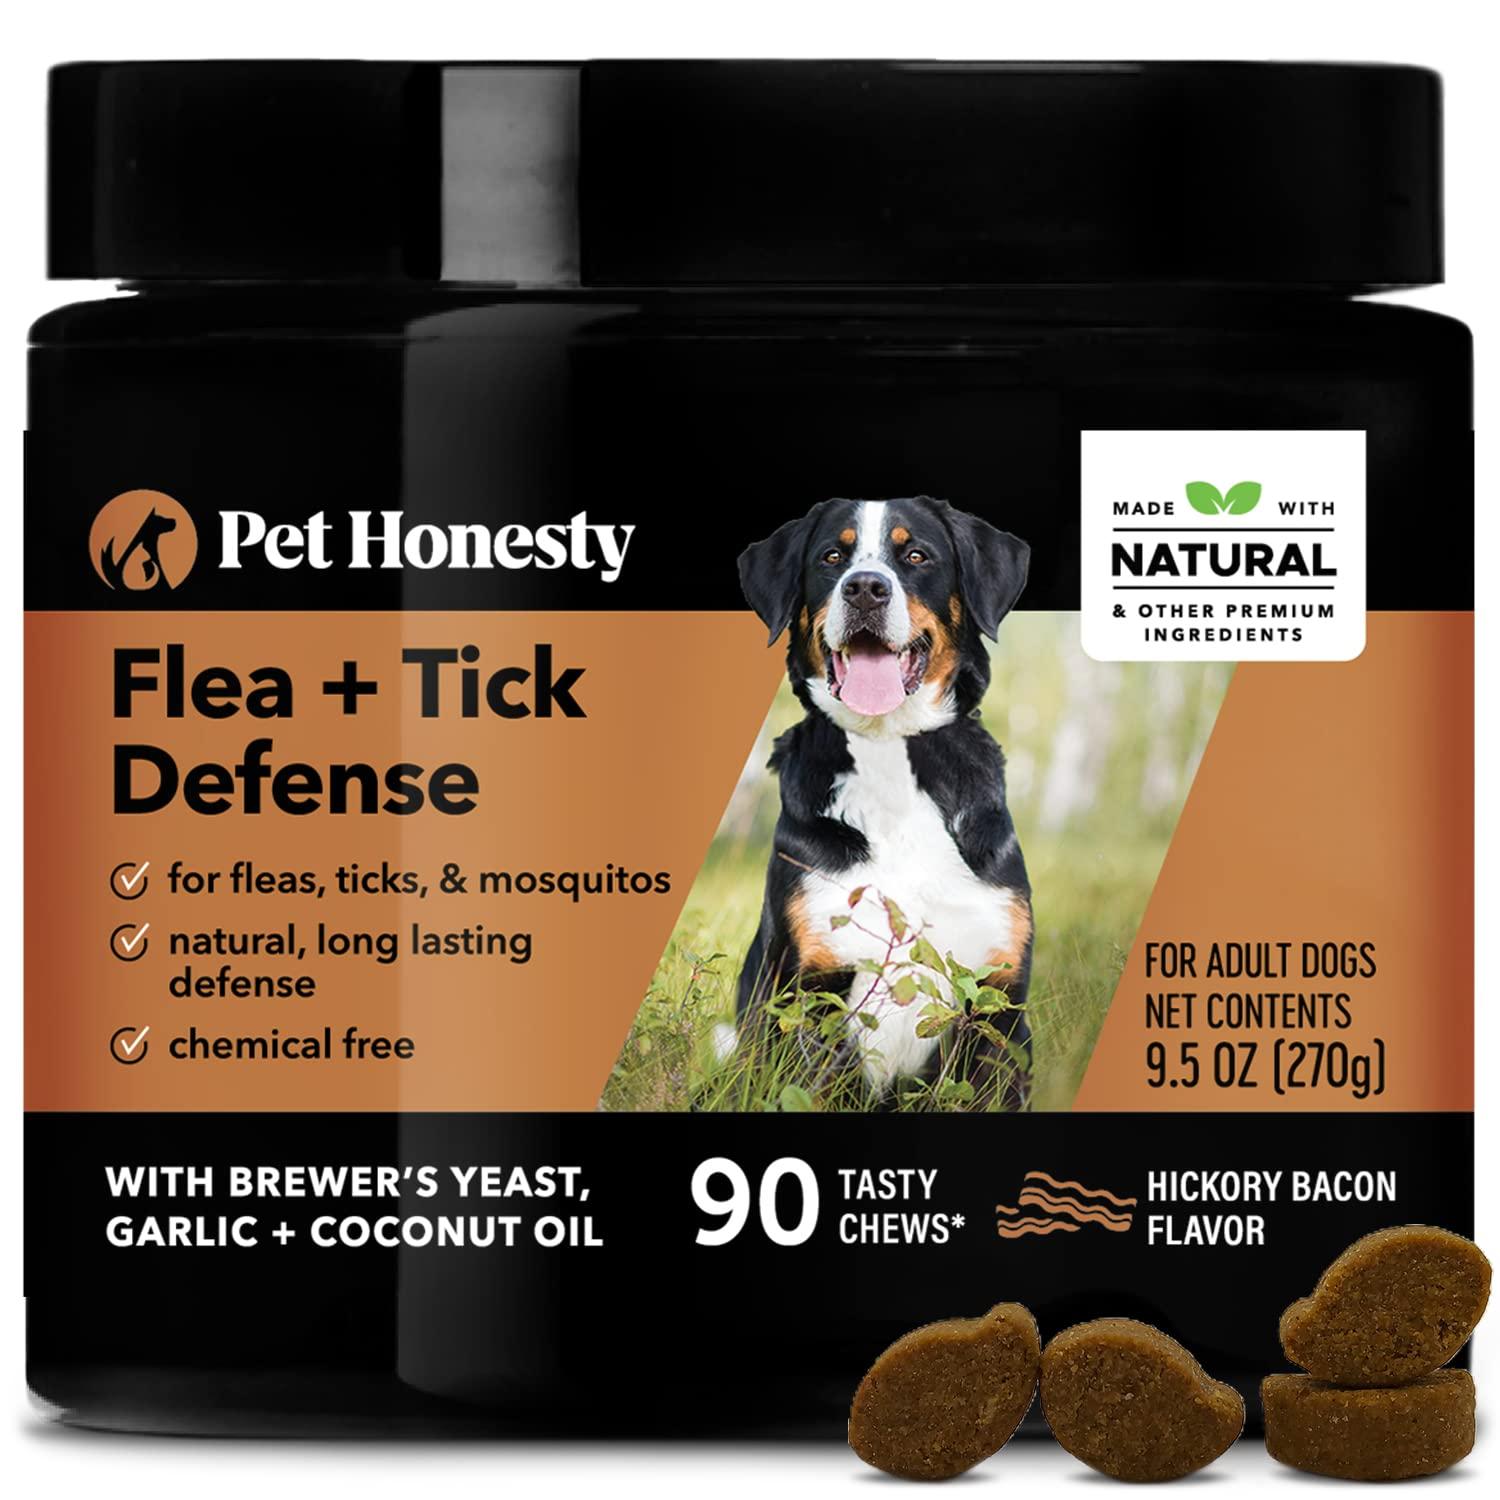 Pet Honesty Flea & Tick Defense Supplement - Natural Flea and Tick Soft Chew for Dogs, Pest Defense to Promote Body\\\'s Natural Response, Oral Flea Pills for Dogs - 90 ct